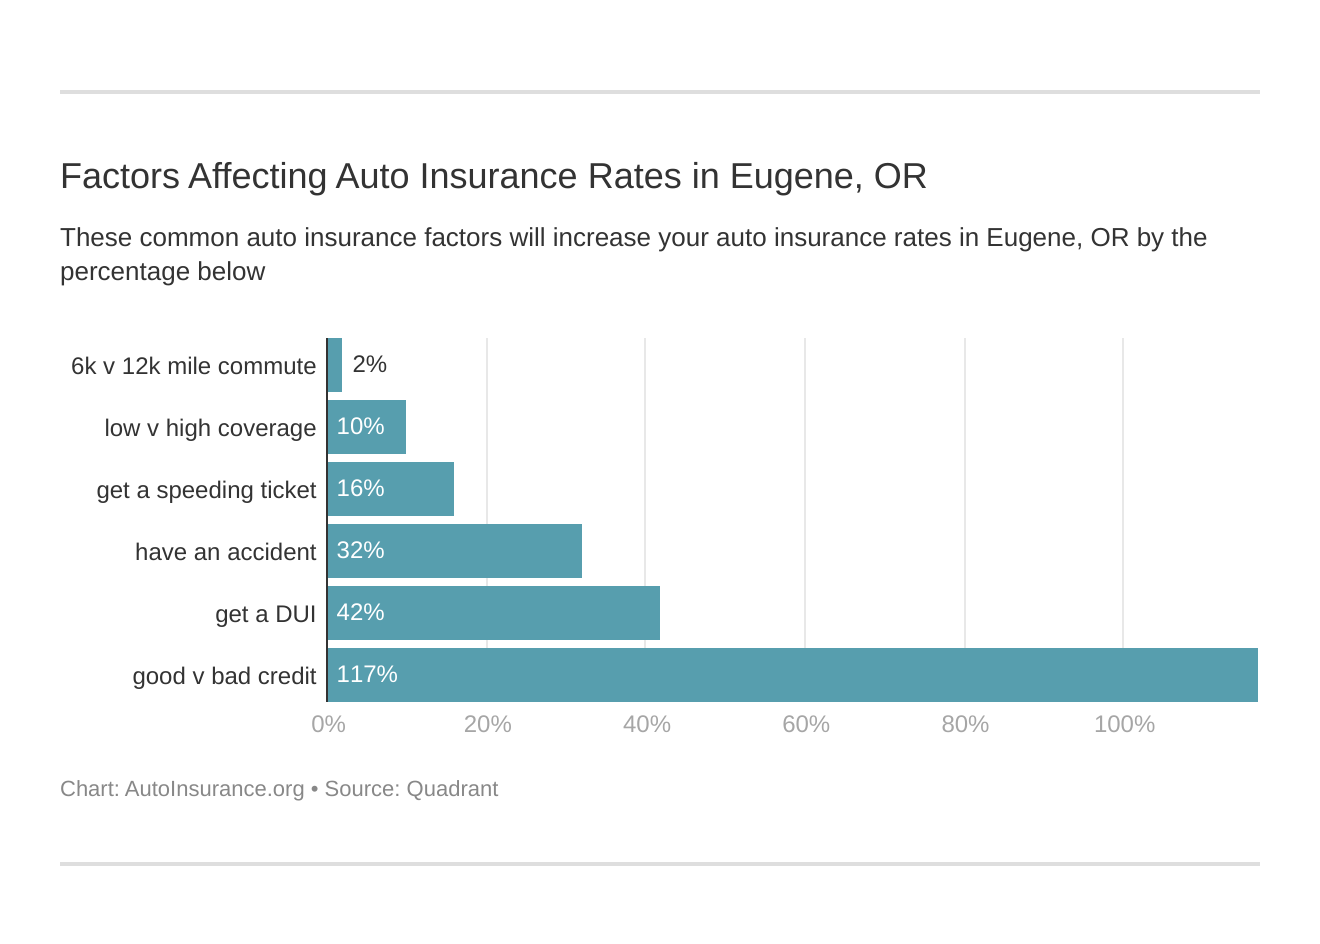 Factors Affecting Auto Insurance Rates in Eugene, OR